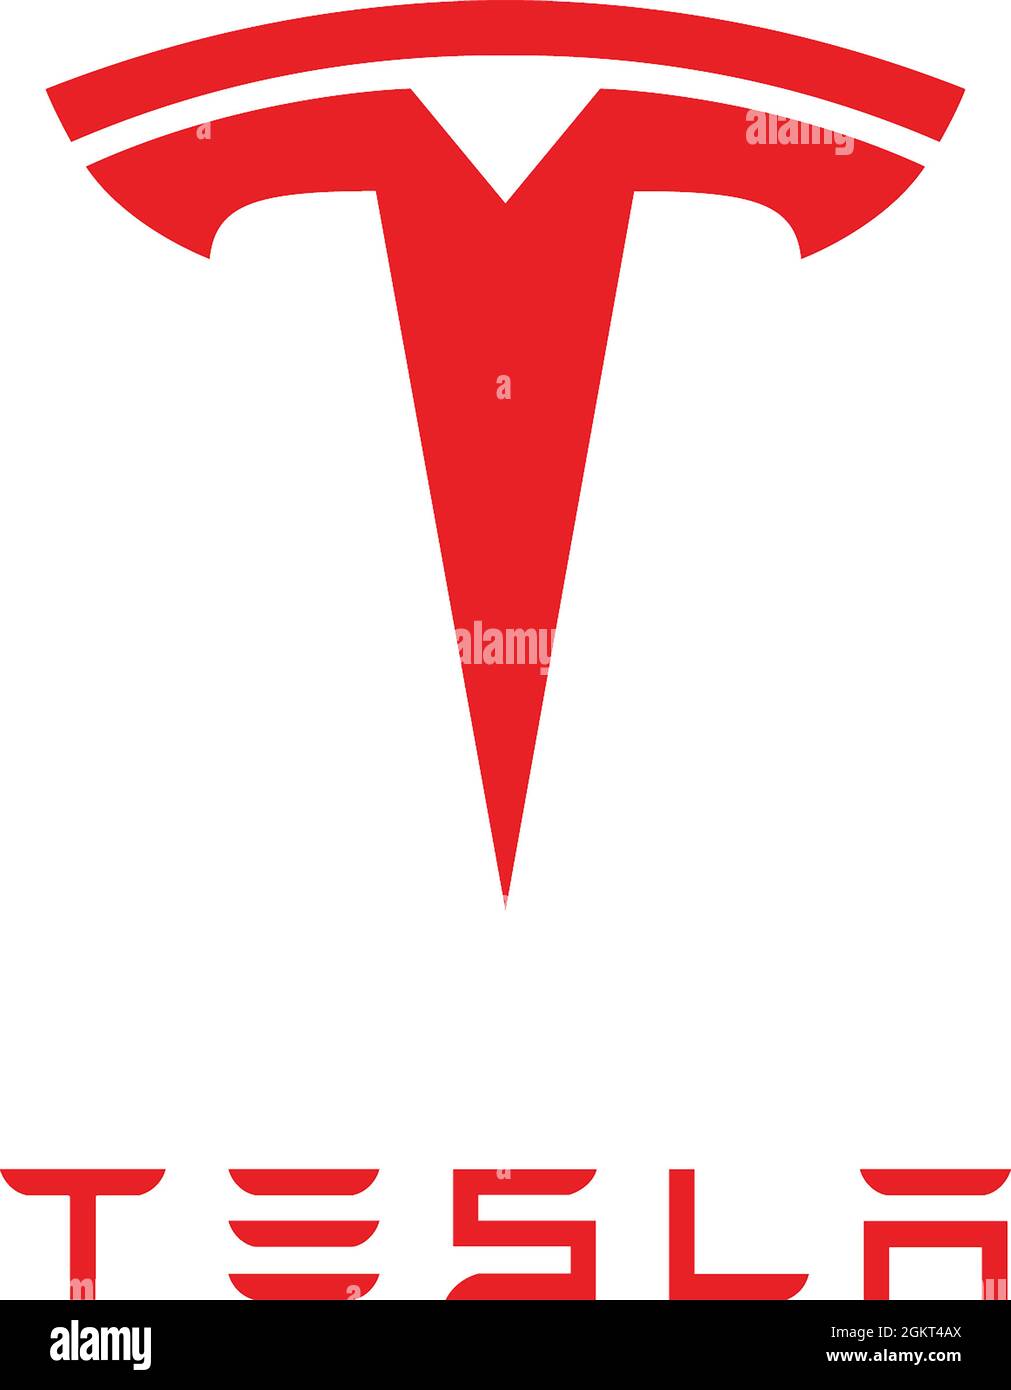 Company logo of American electric vehicle and clean energy company Tesla based in California Paolo Alto - United States. Stock Photo